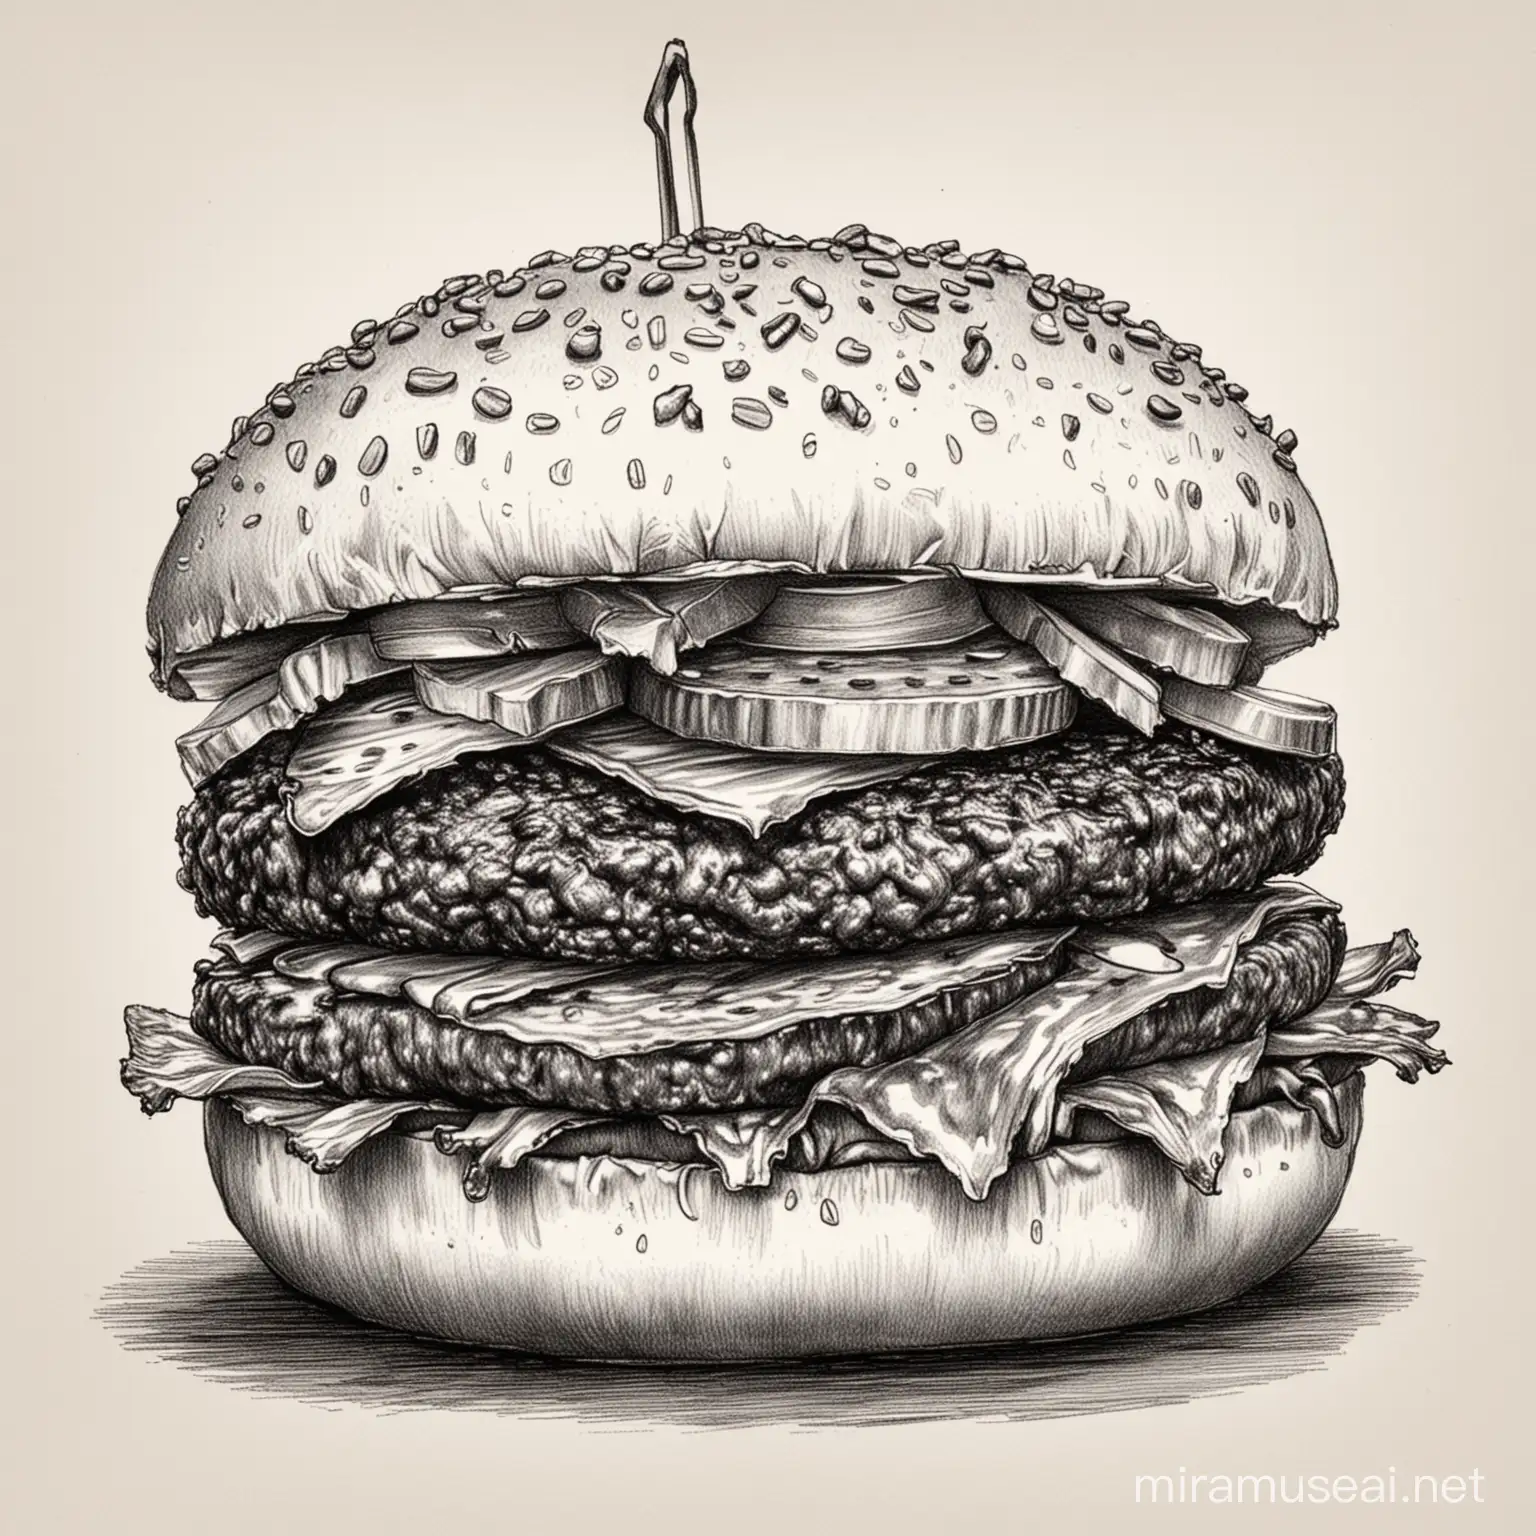 An ink drawing of a beef burger. The drawing should look kind of amateur and scratchy.